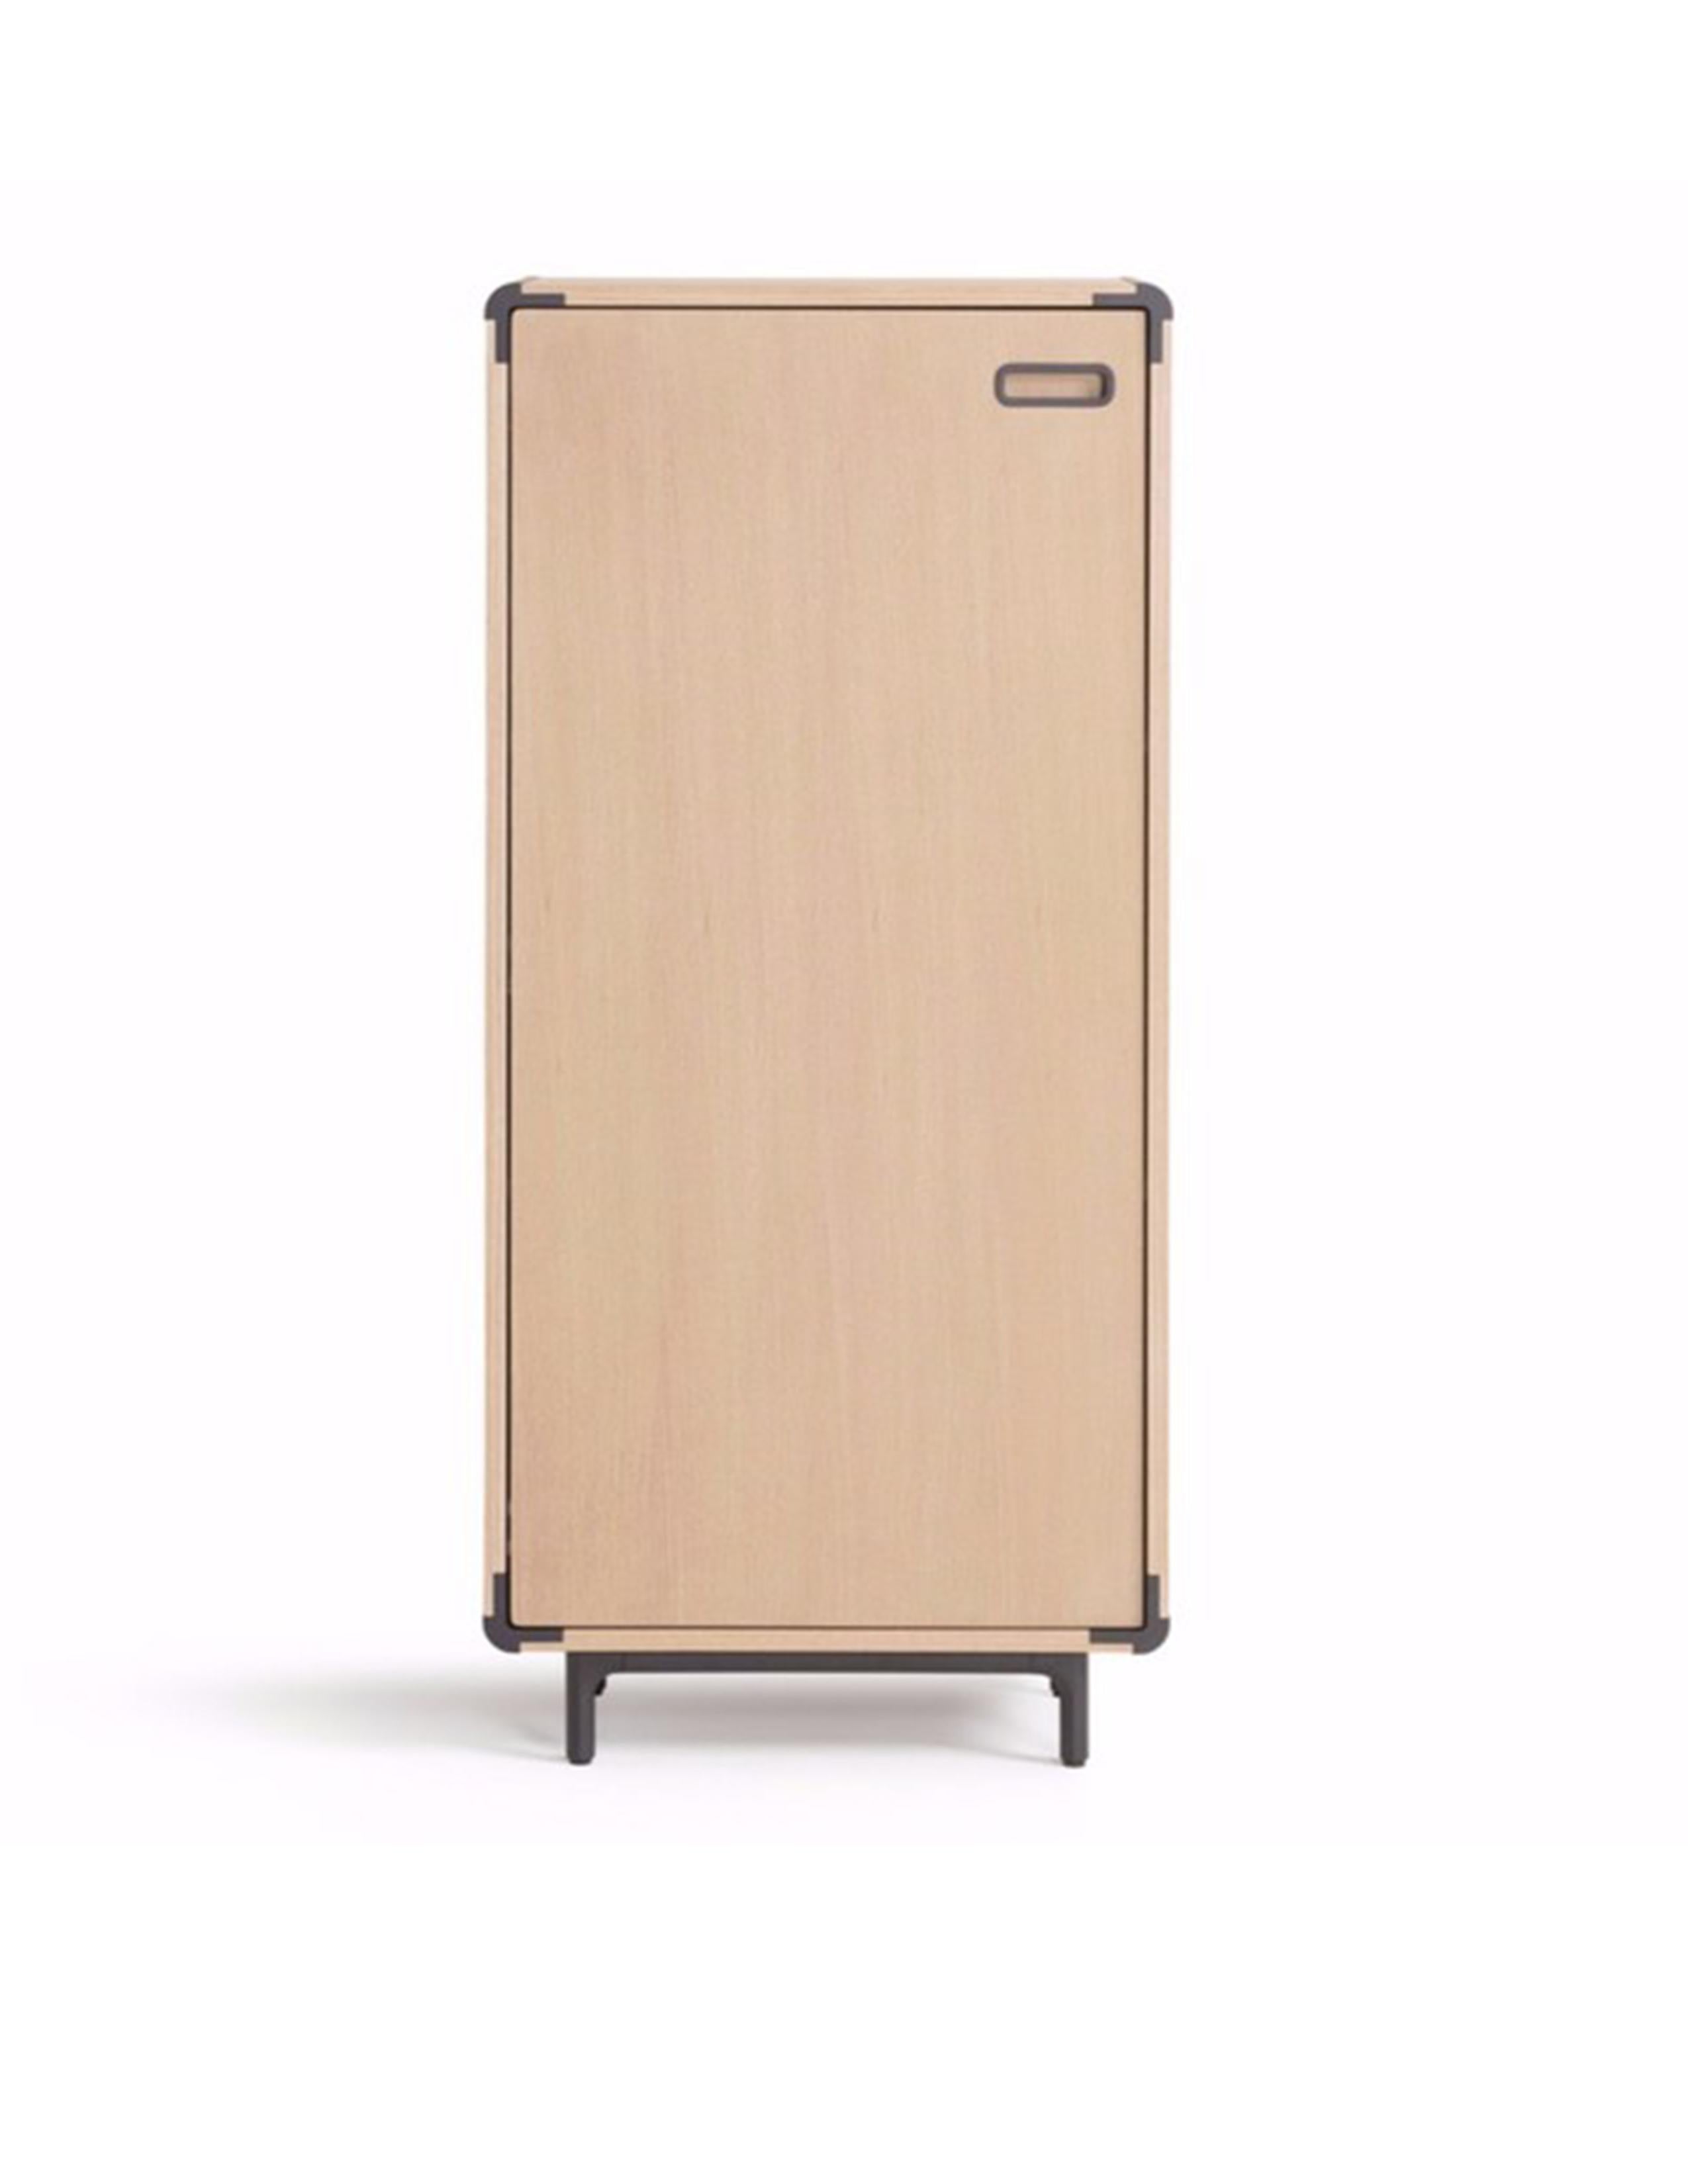 The iconic Extens cabinet program, with its striking aluminum corner elements, has been updated by designer Khodi Feiz. Based on today’s lifestyle needs and aspirations. Extens now has compact, sleeker dimension. Two doors right and two shelves.